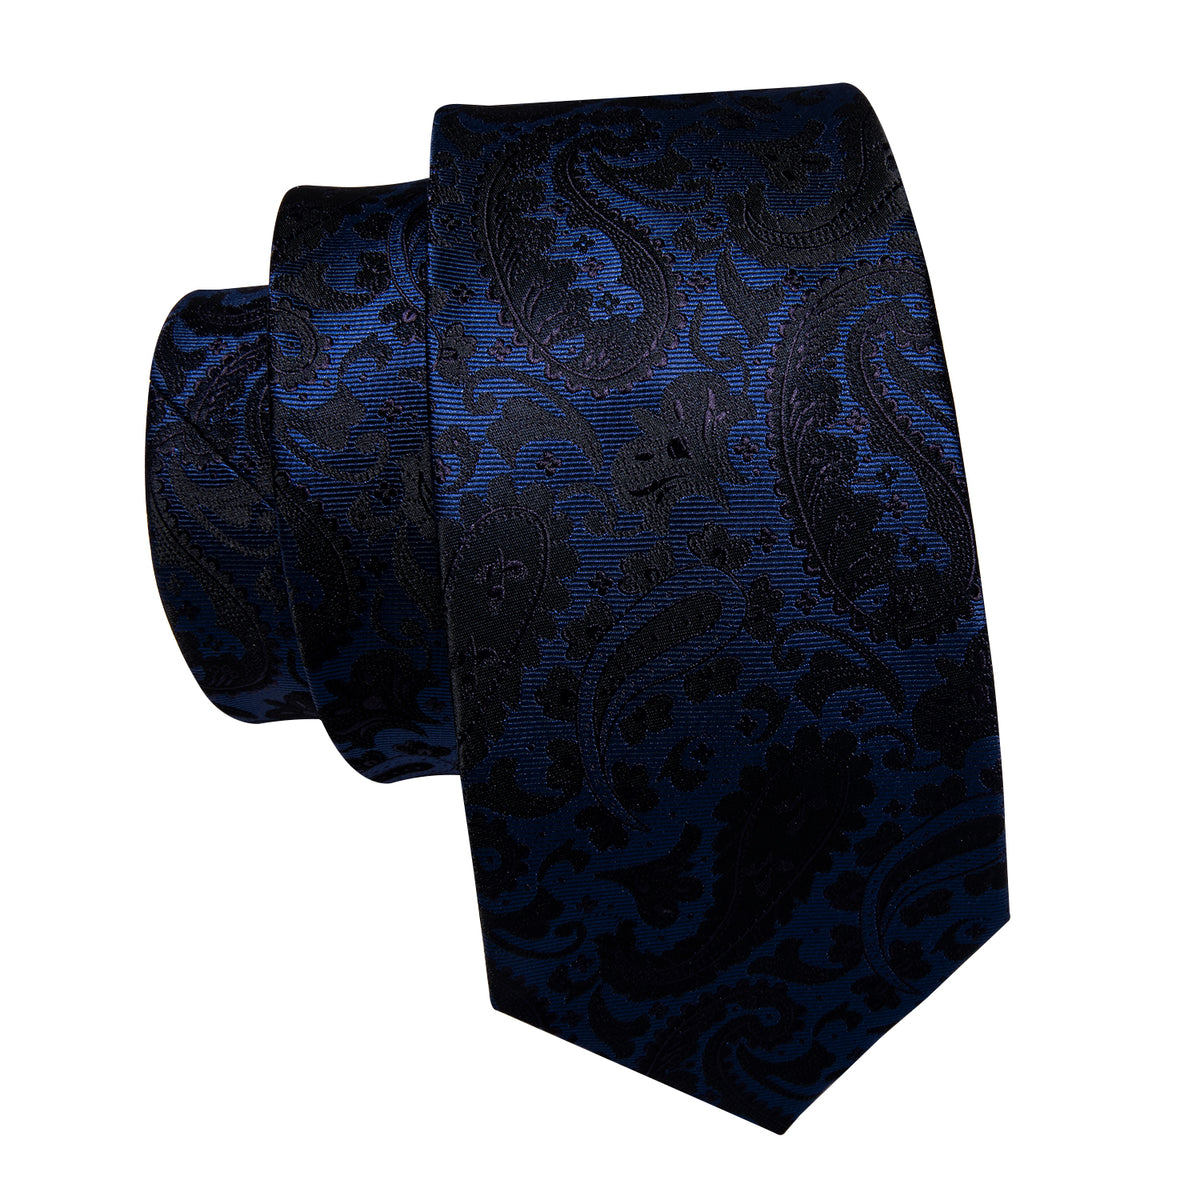 We Own The Night Tie, Pocket Square and Cufflinks – Sophisticated Gentlemen